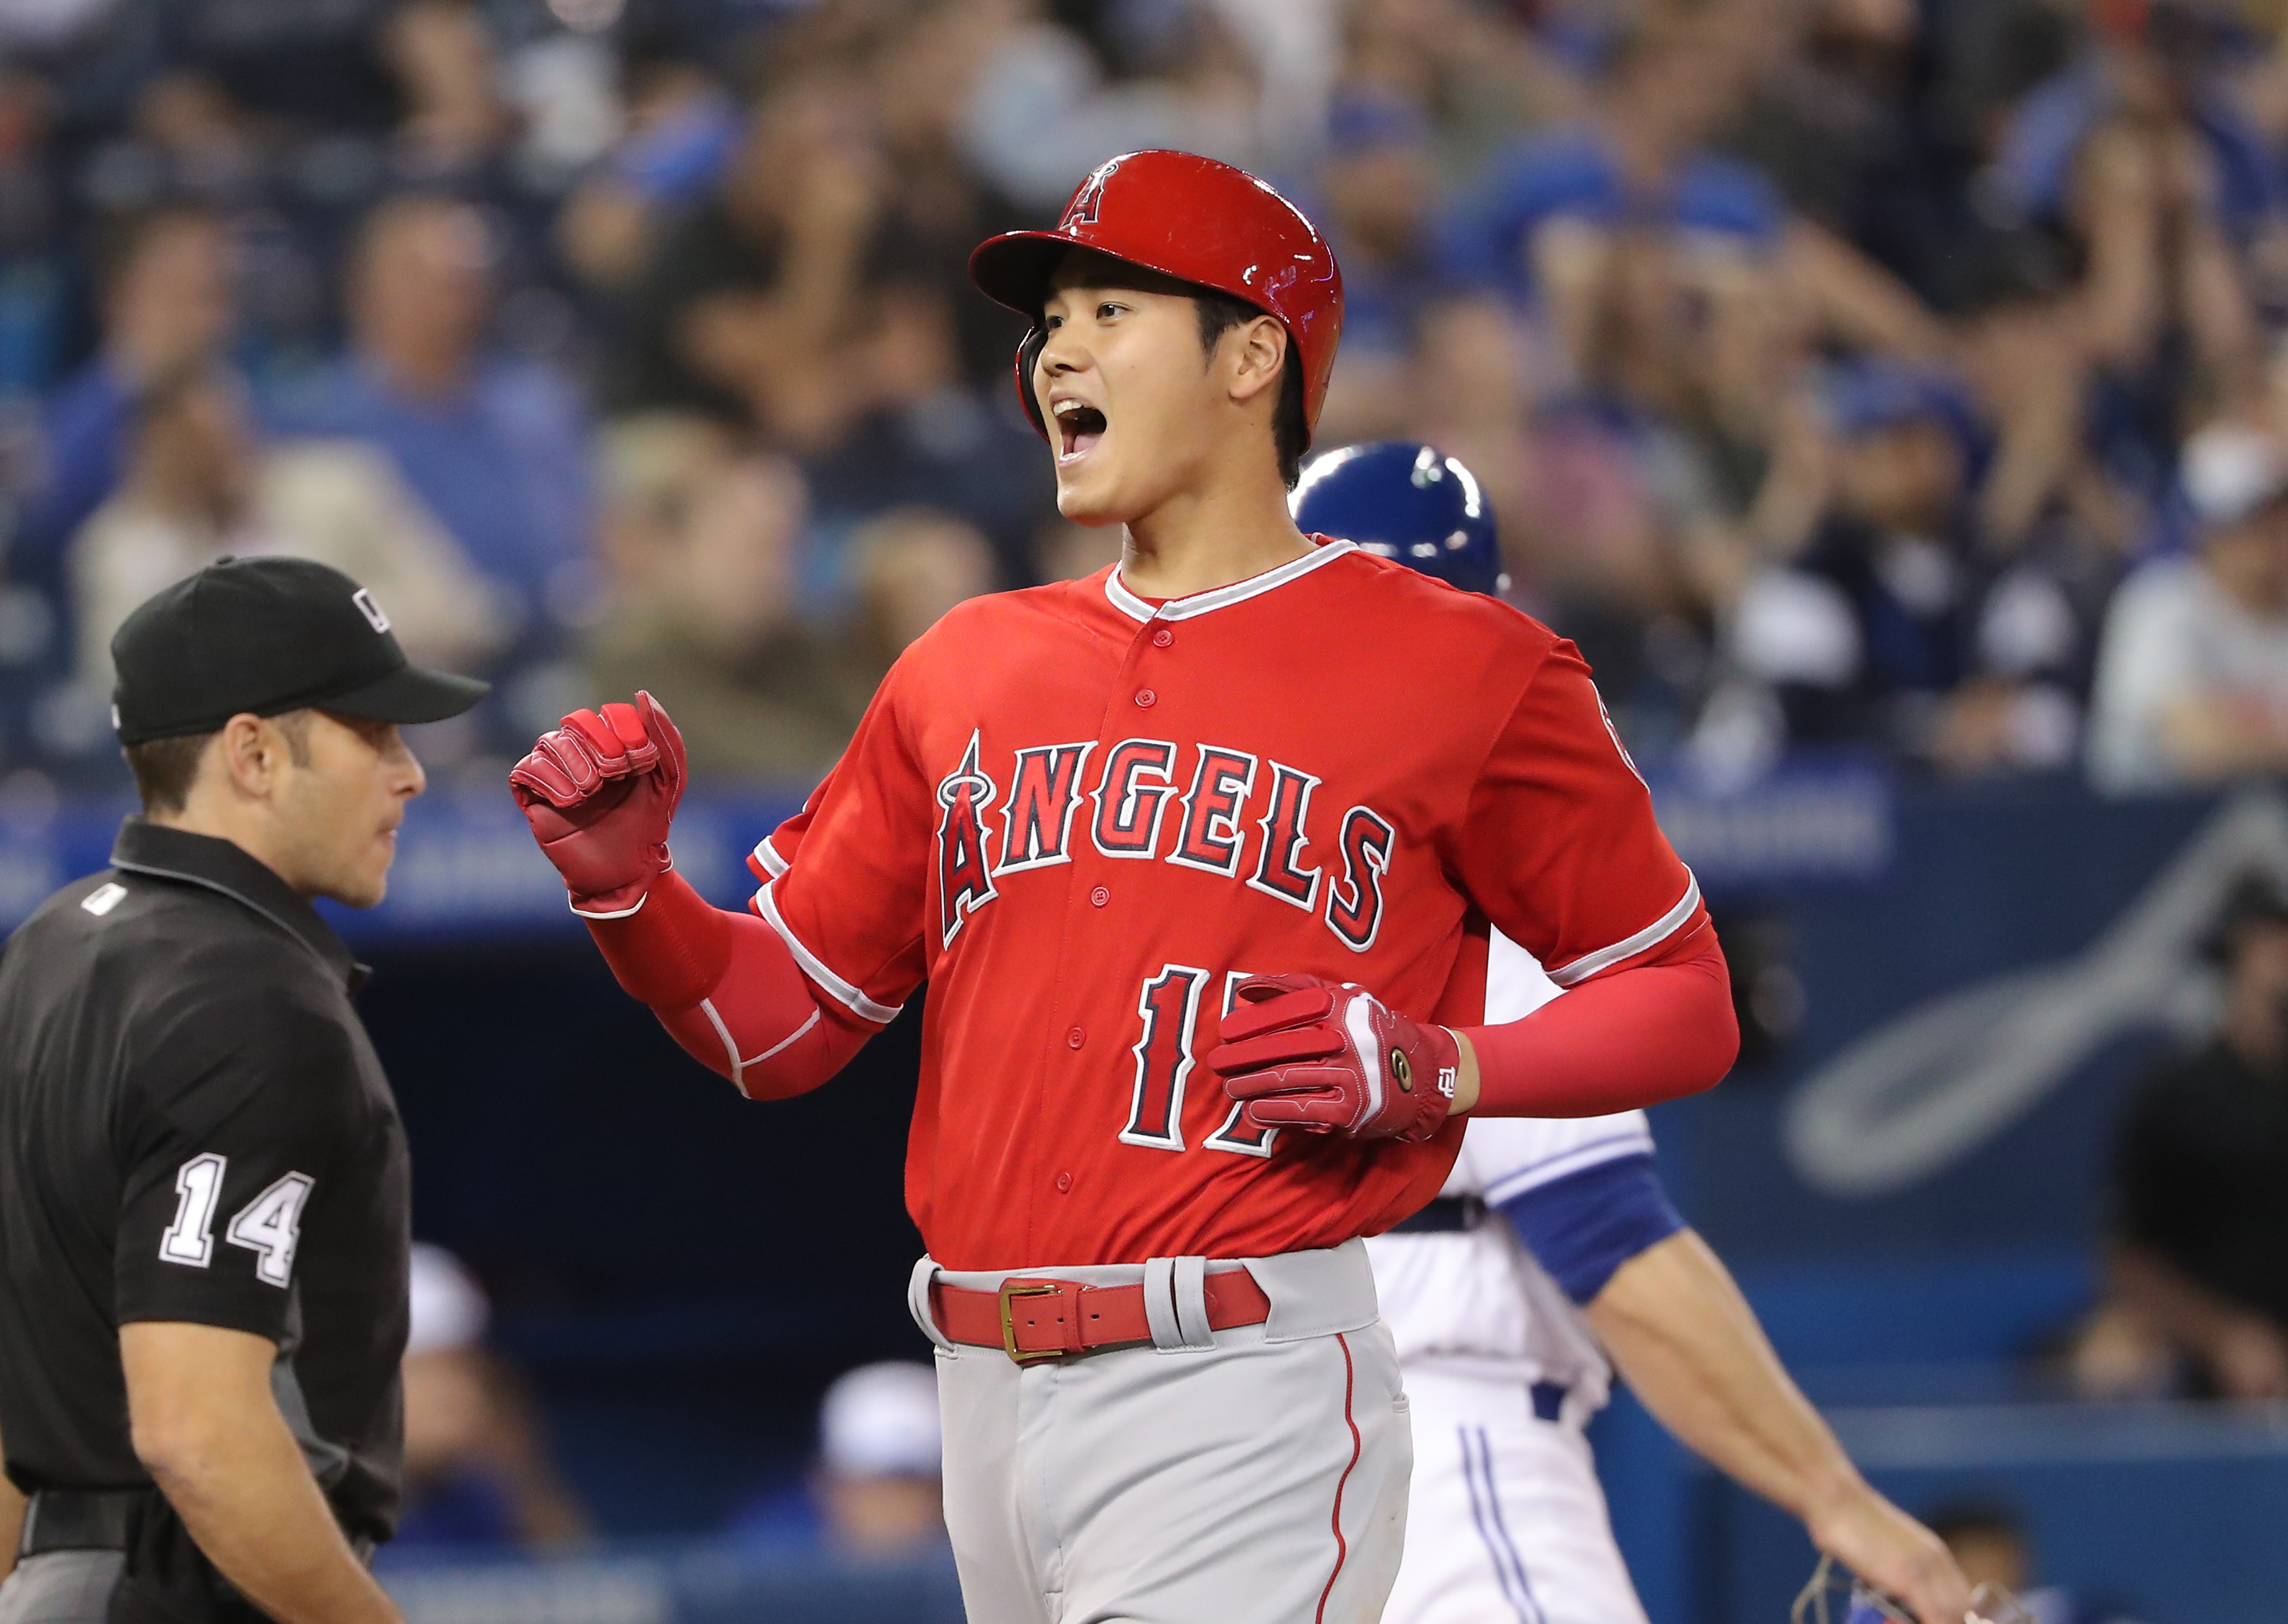 Andrelton Simmons empowered by knowledge even as the Angels lose to the  Blue Jays, 5-0 - Los Angeles Times